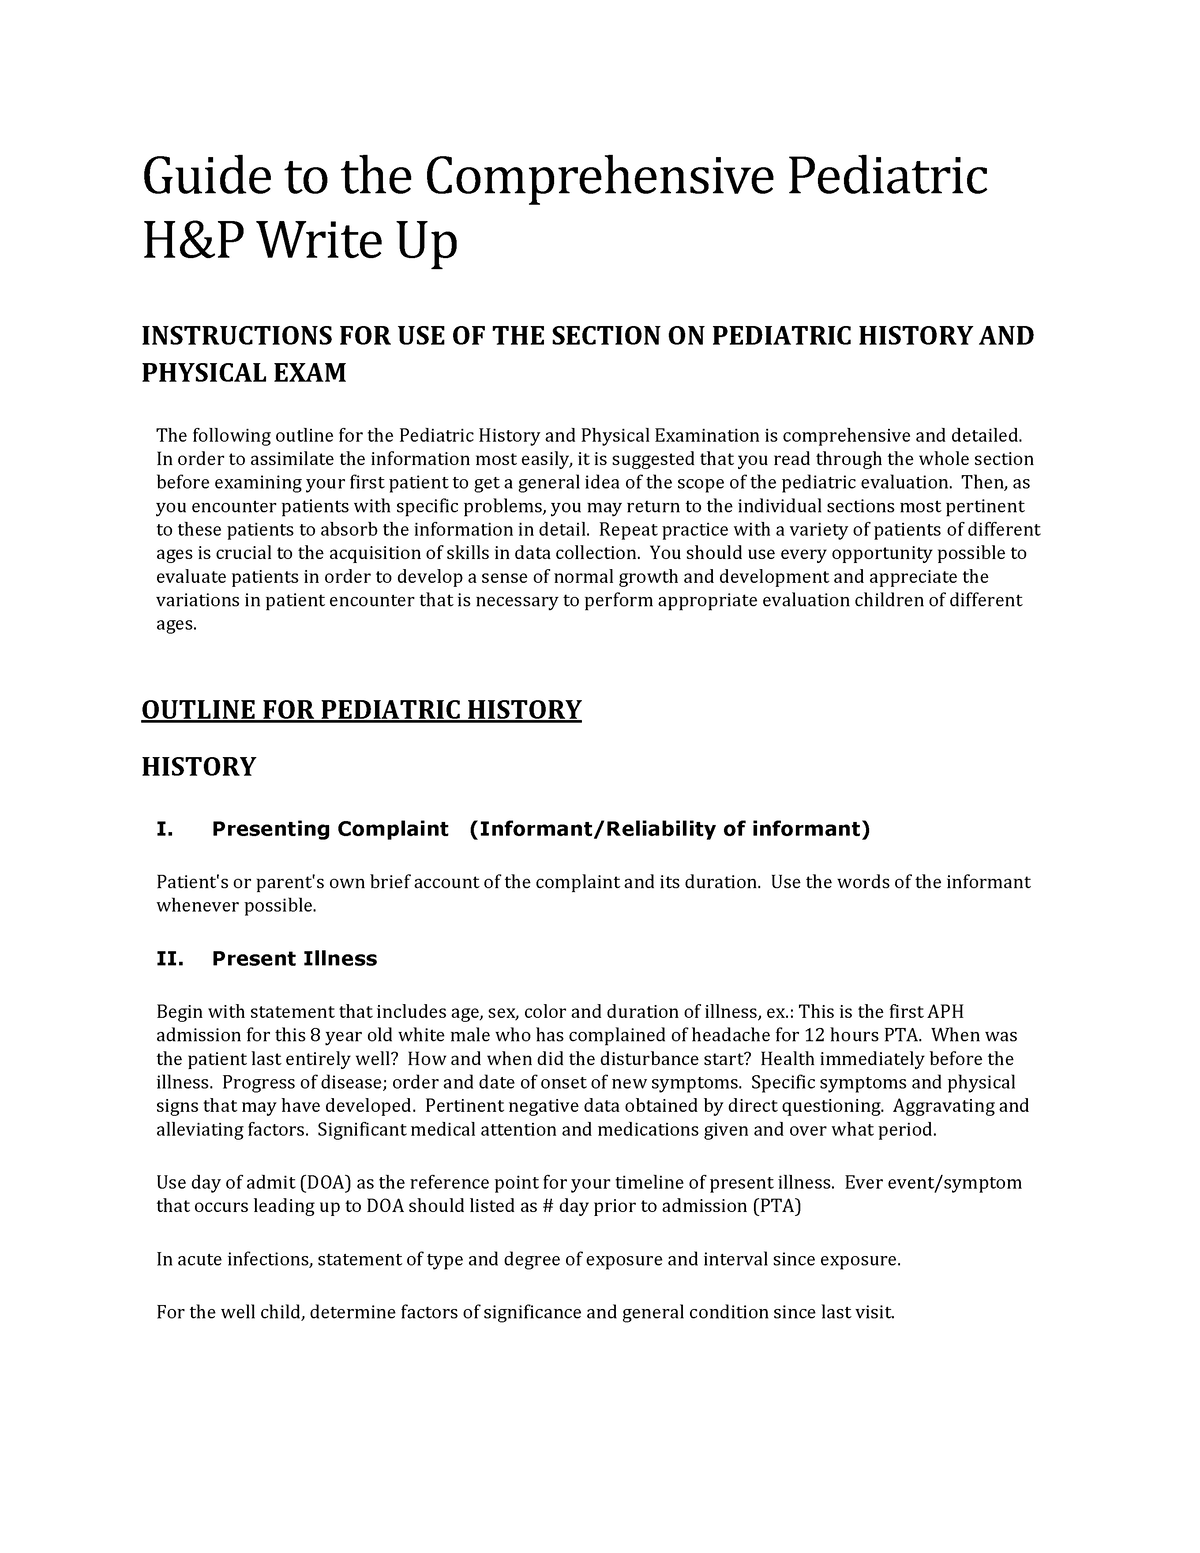 guide-to-the-comprehensive-pediatric-h-and-p-write-up-guide-to-the